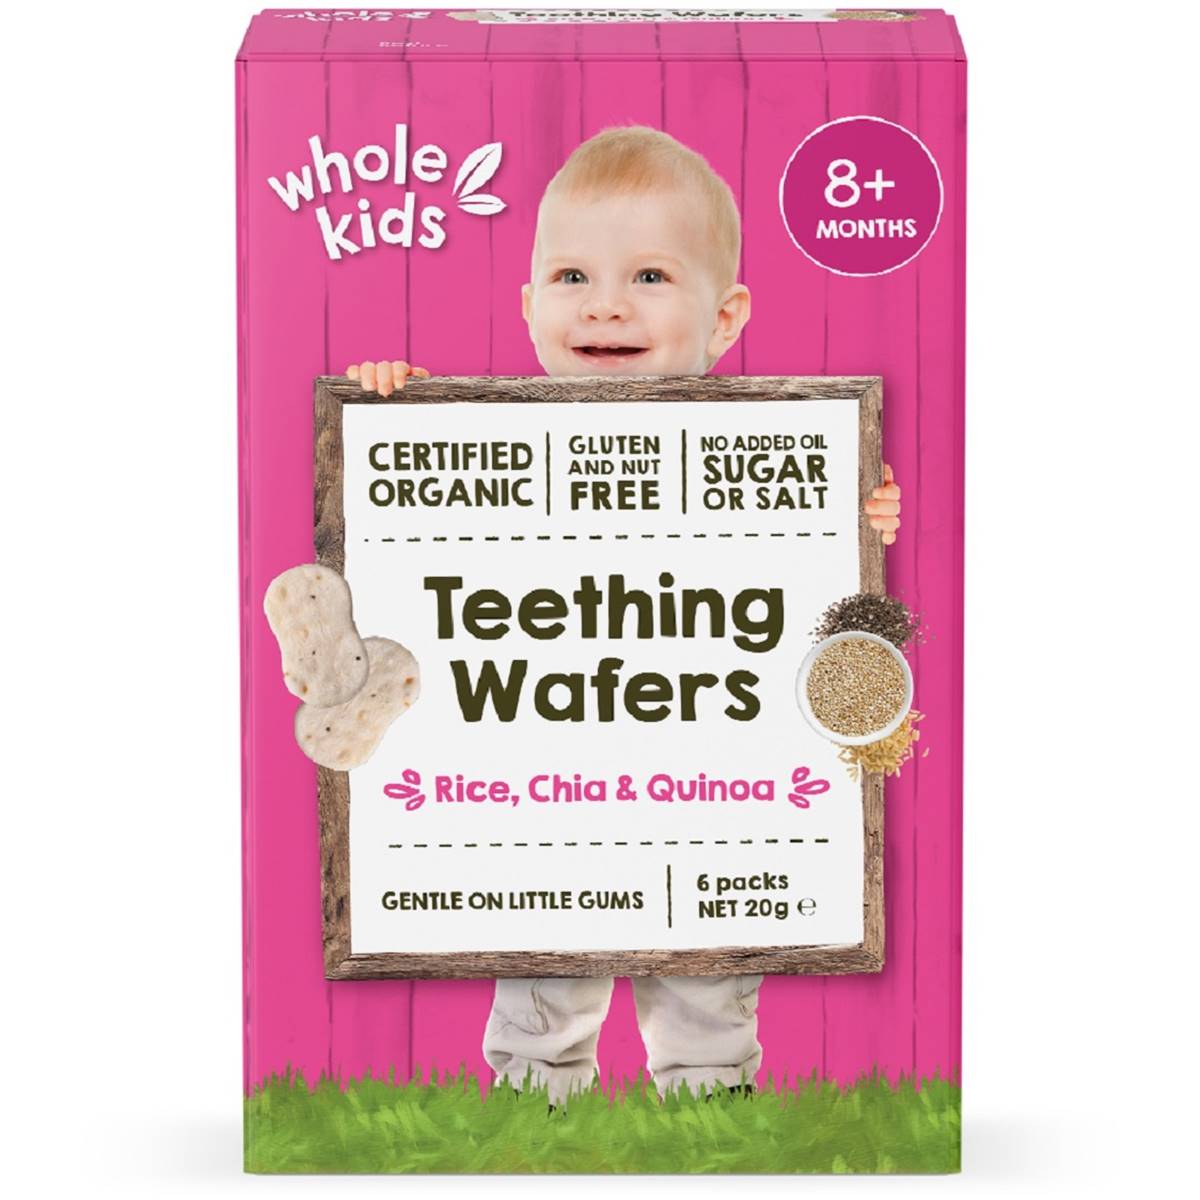 Calories in Whole Kids Organic Teething Wafers